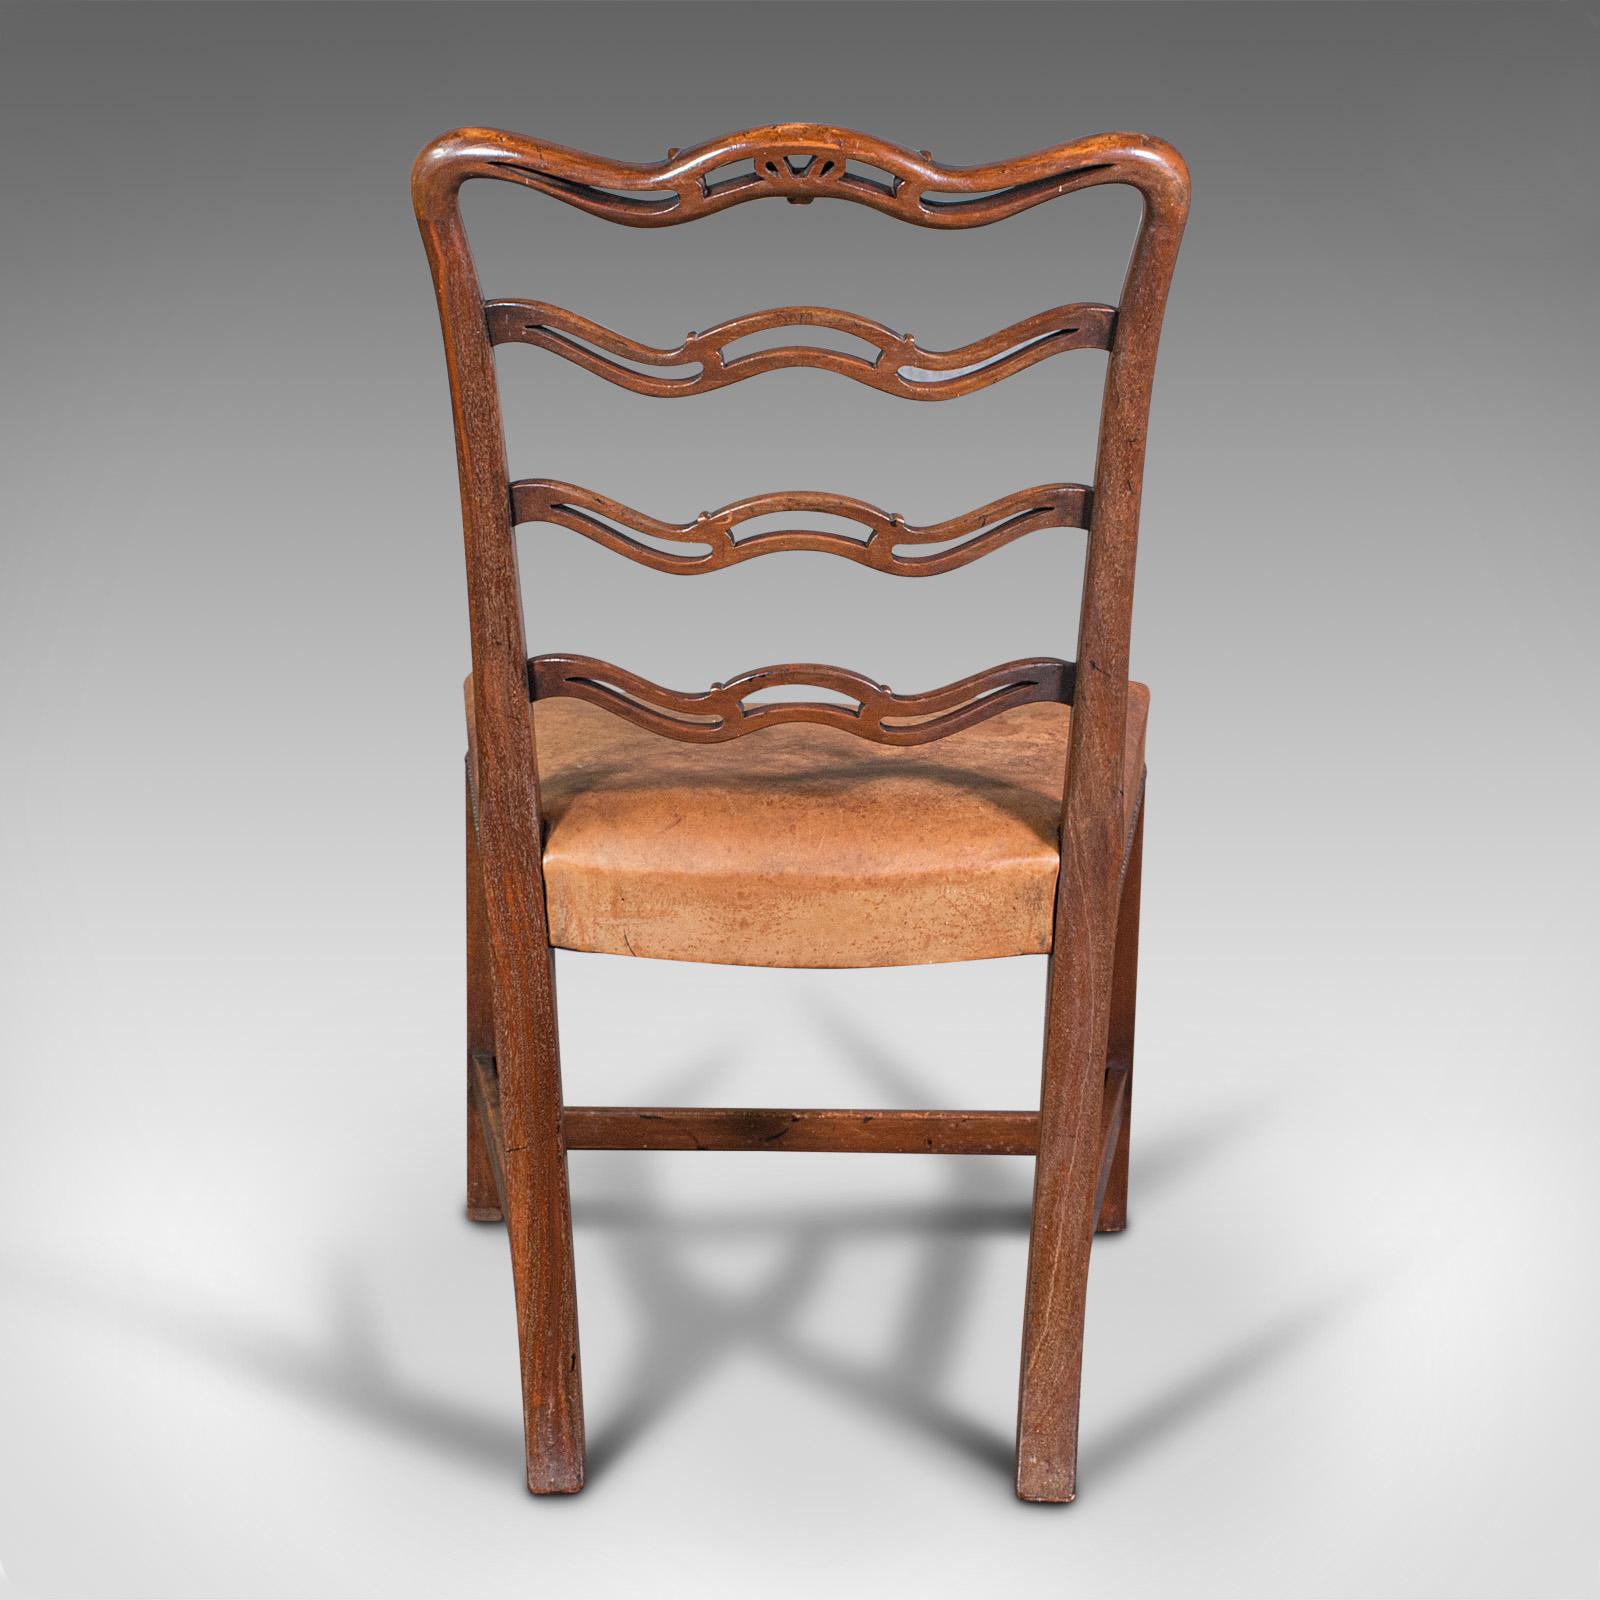 Set of 4 Vintage Ladder Back Chairs, Irish, Carver, Seat, Art Deco, Circa 1940 For Sale 1